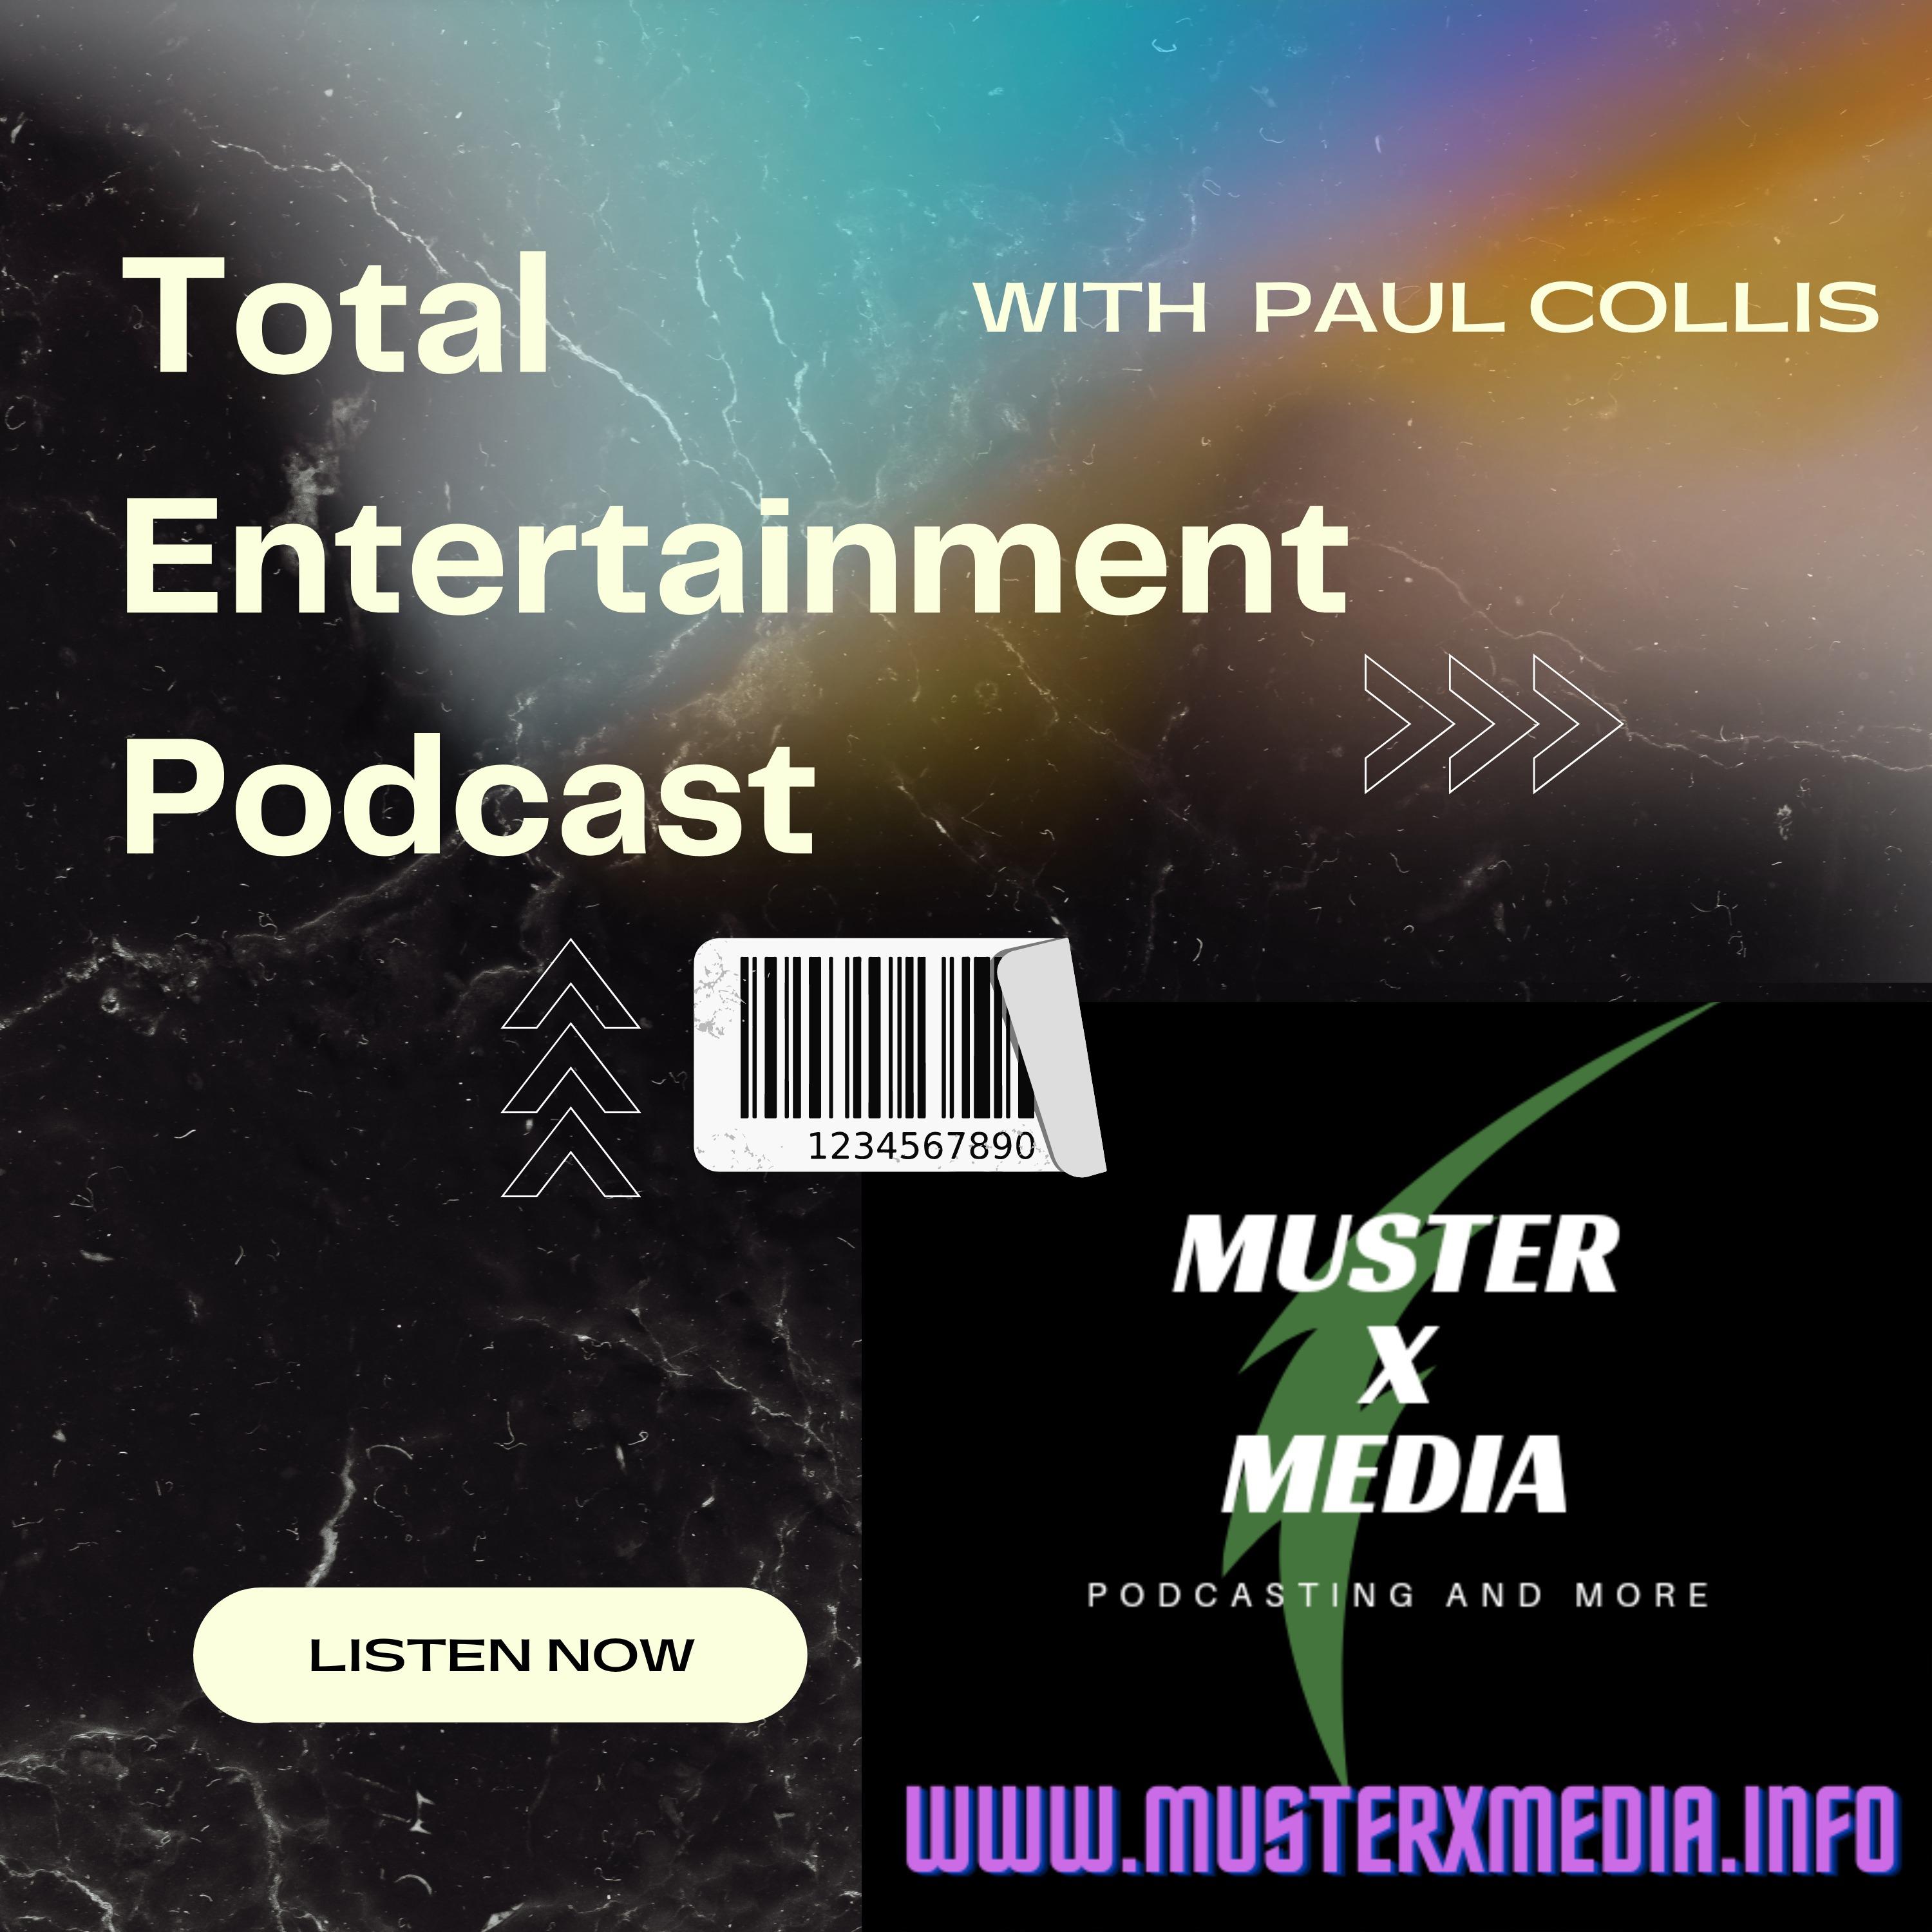 Total Entertainment Podcast